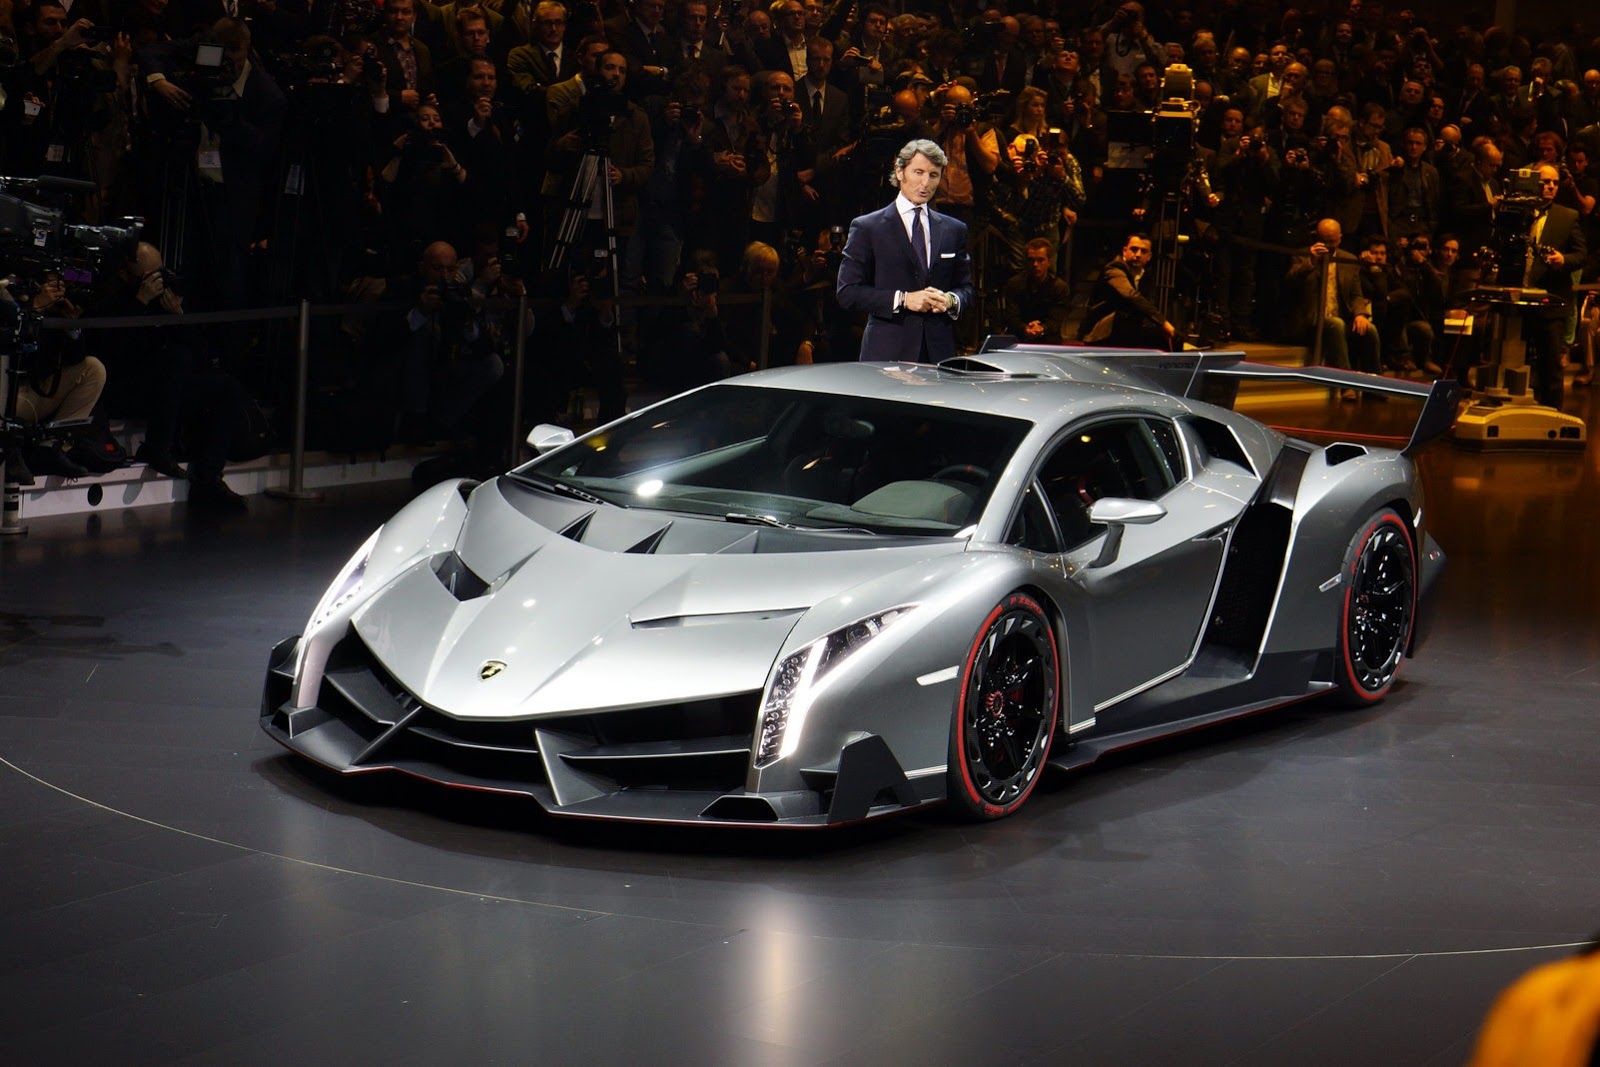 Lamborghini Veneno Coupe #1 Is Looking For A New Home ...